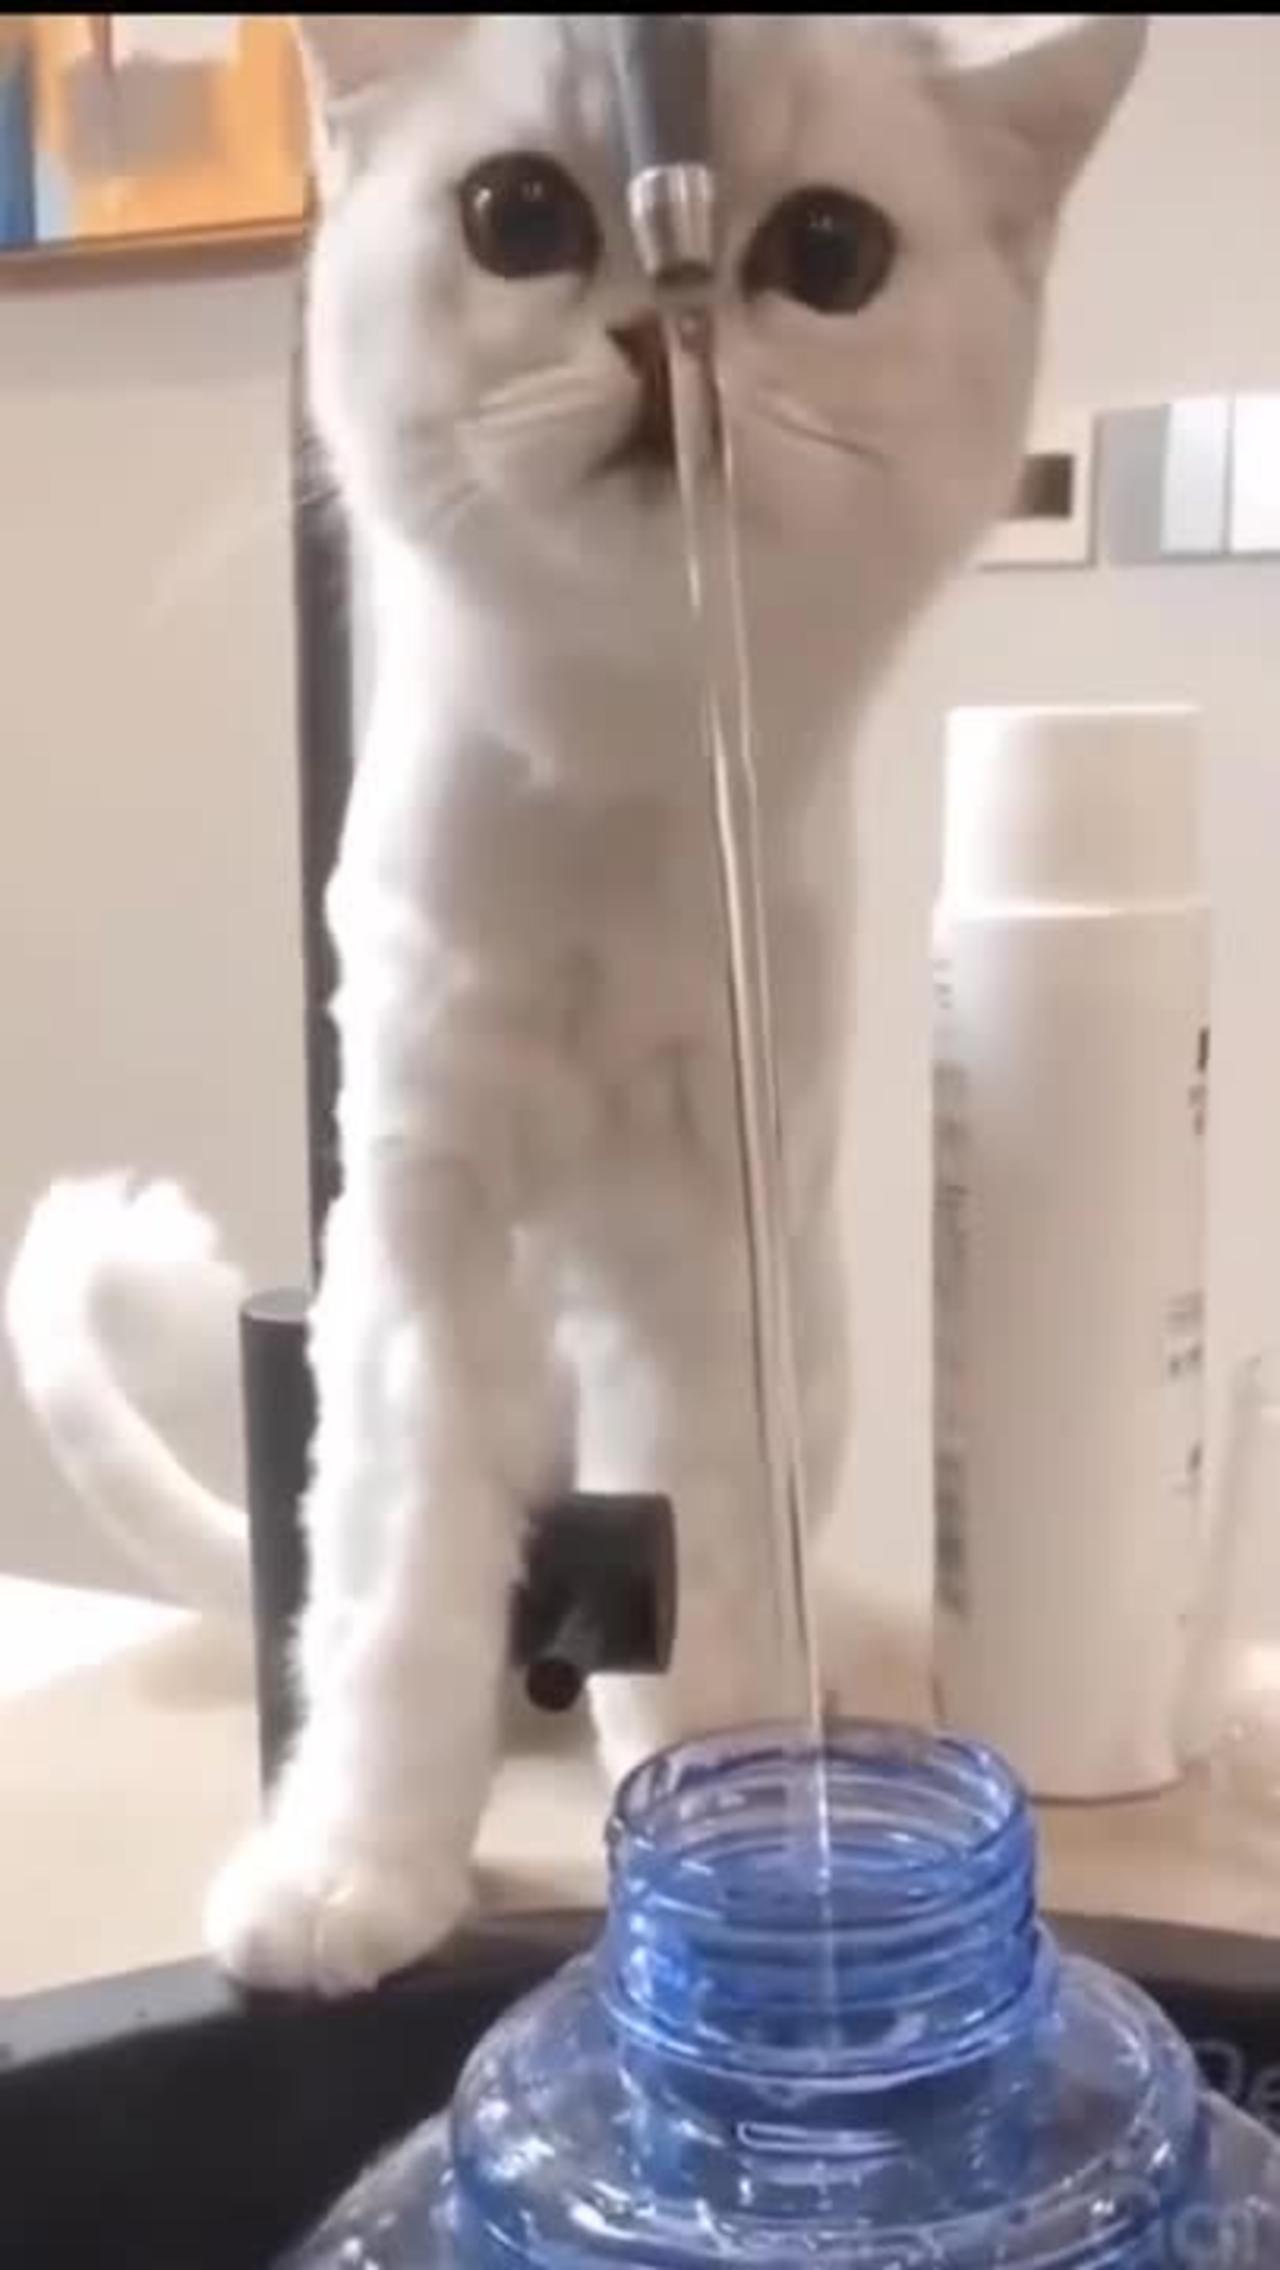 Cute cat is playing with water!